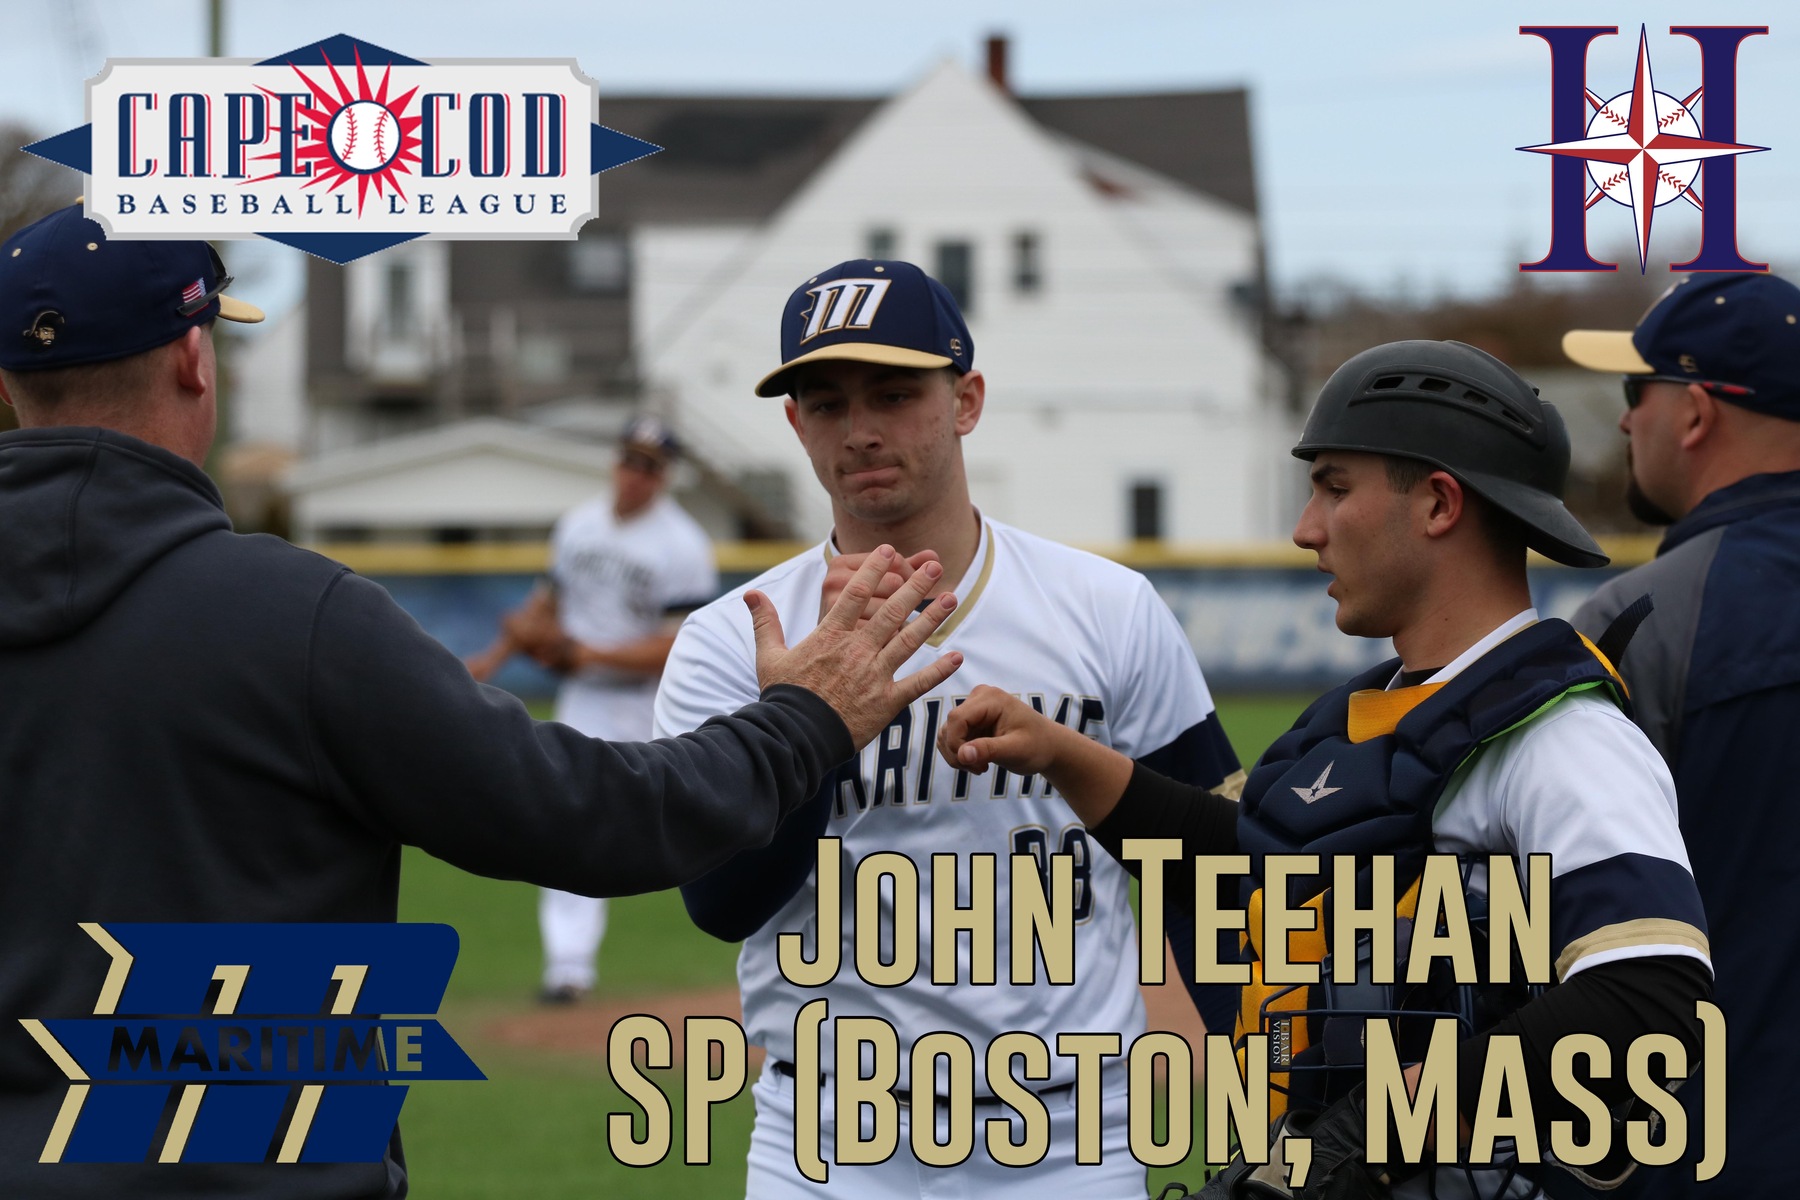 Teehan Signs with Harwich Mariners of Cape League